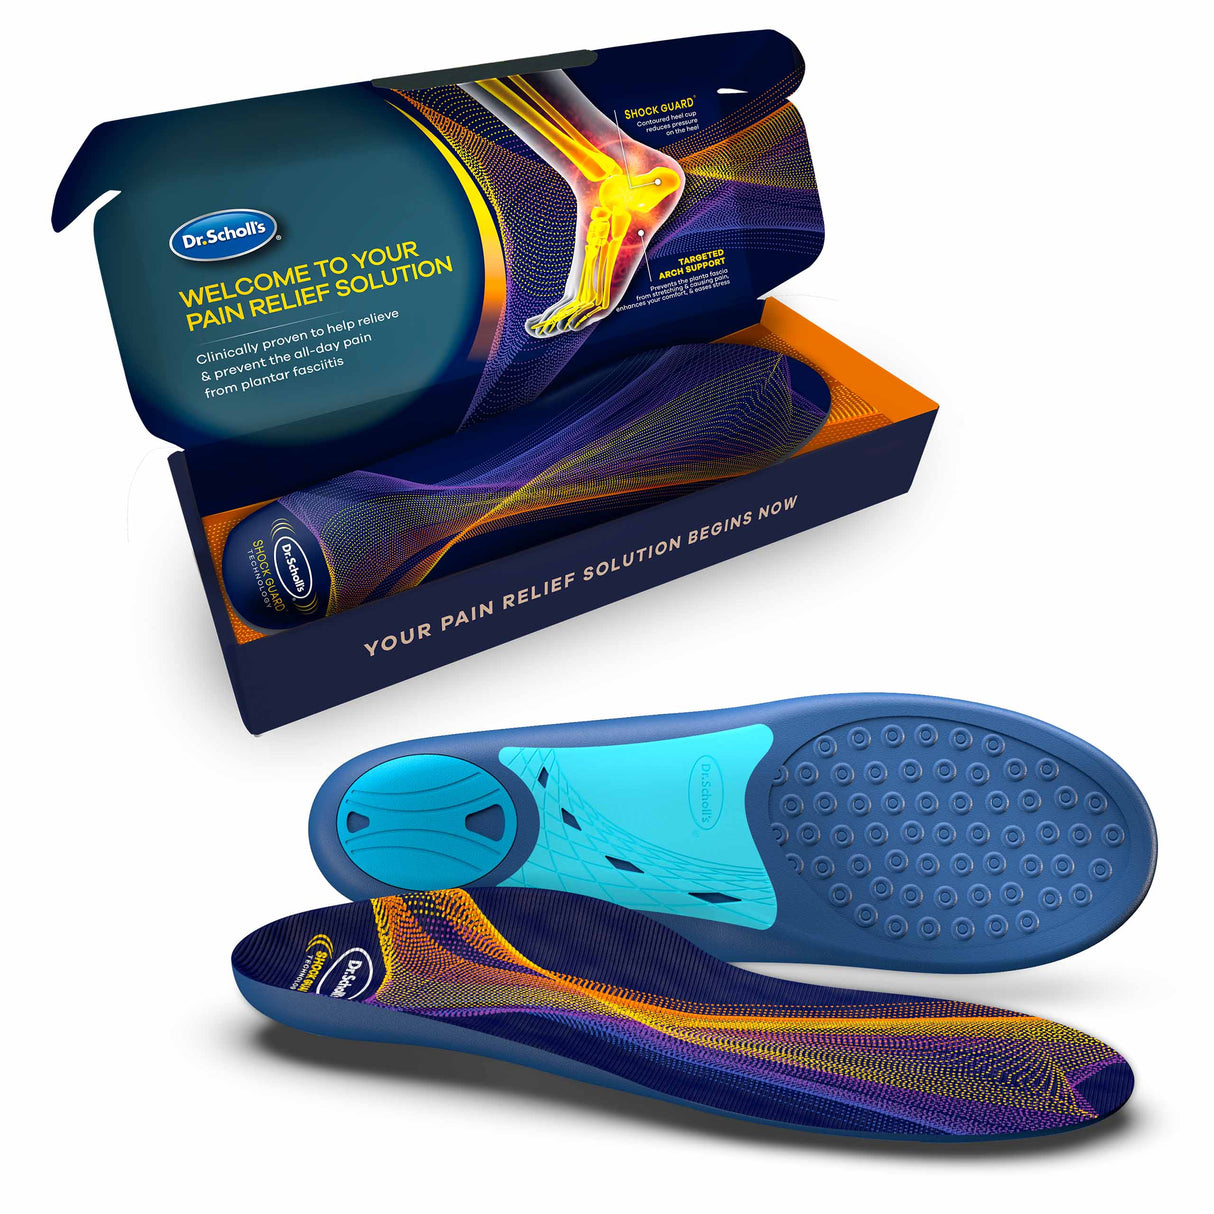 image of sized to fit plantar insoles in and out of package